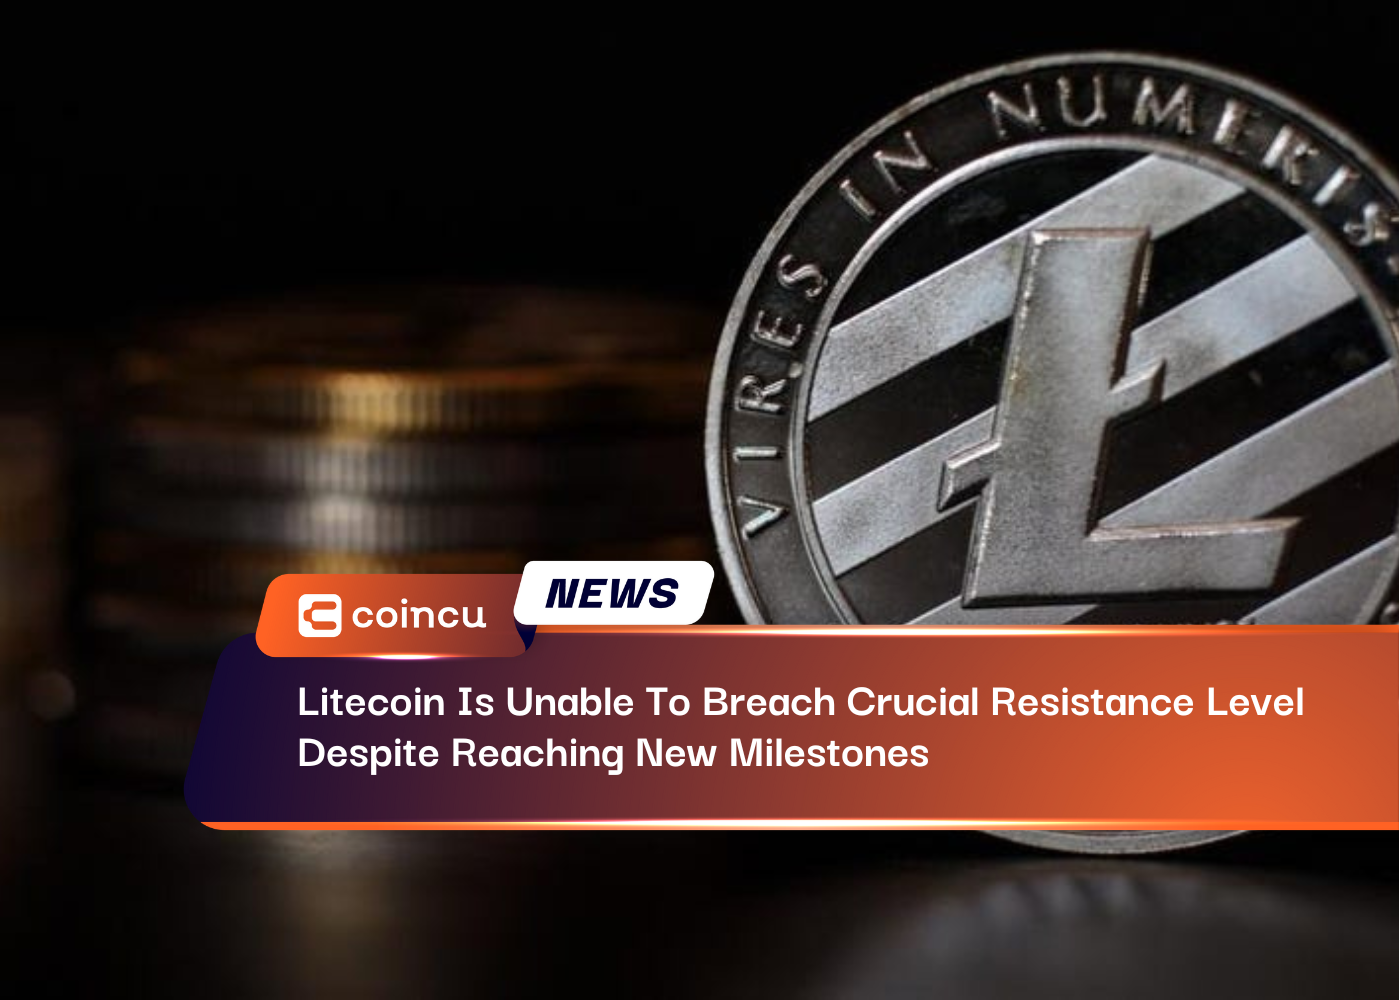 Litecoin Is Unable To Breach Crucial Resistance Level